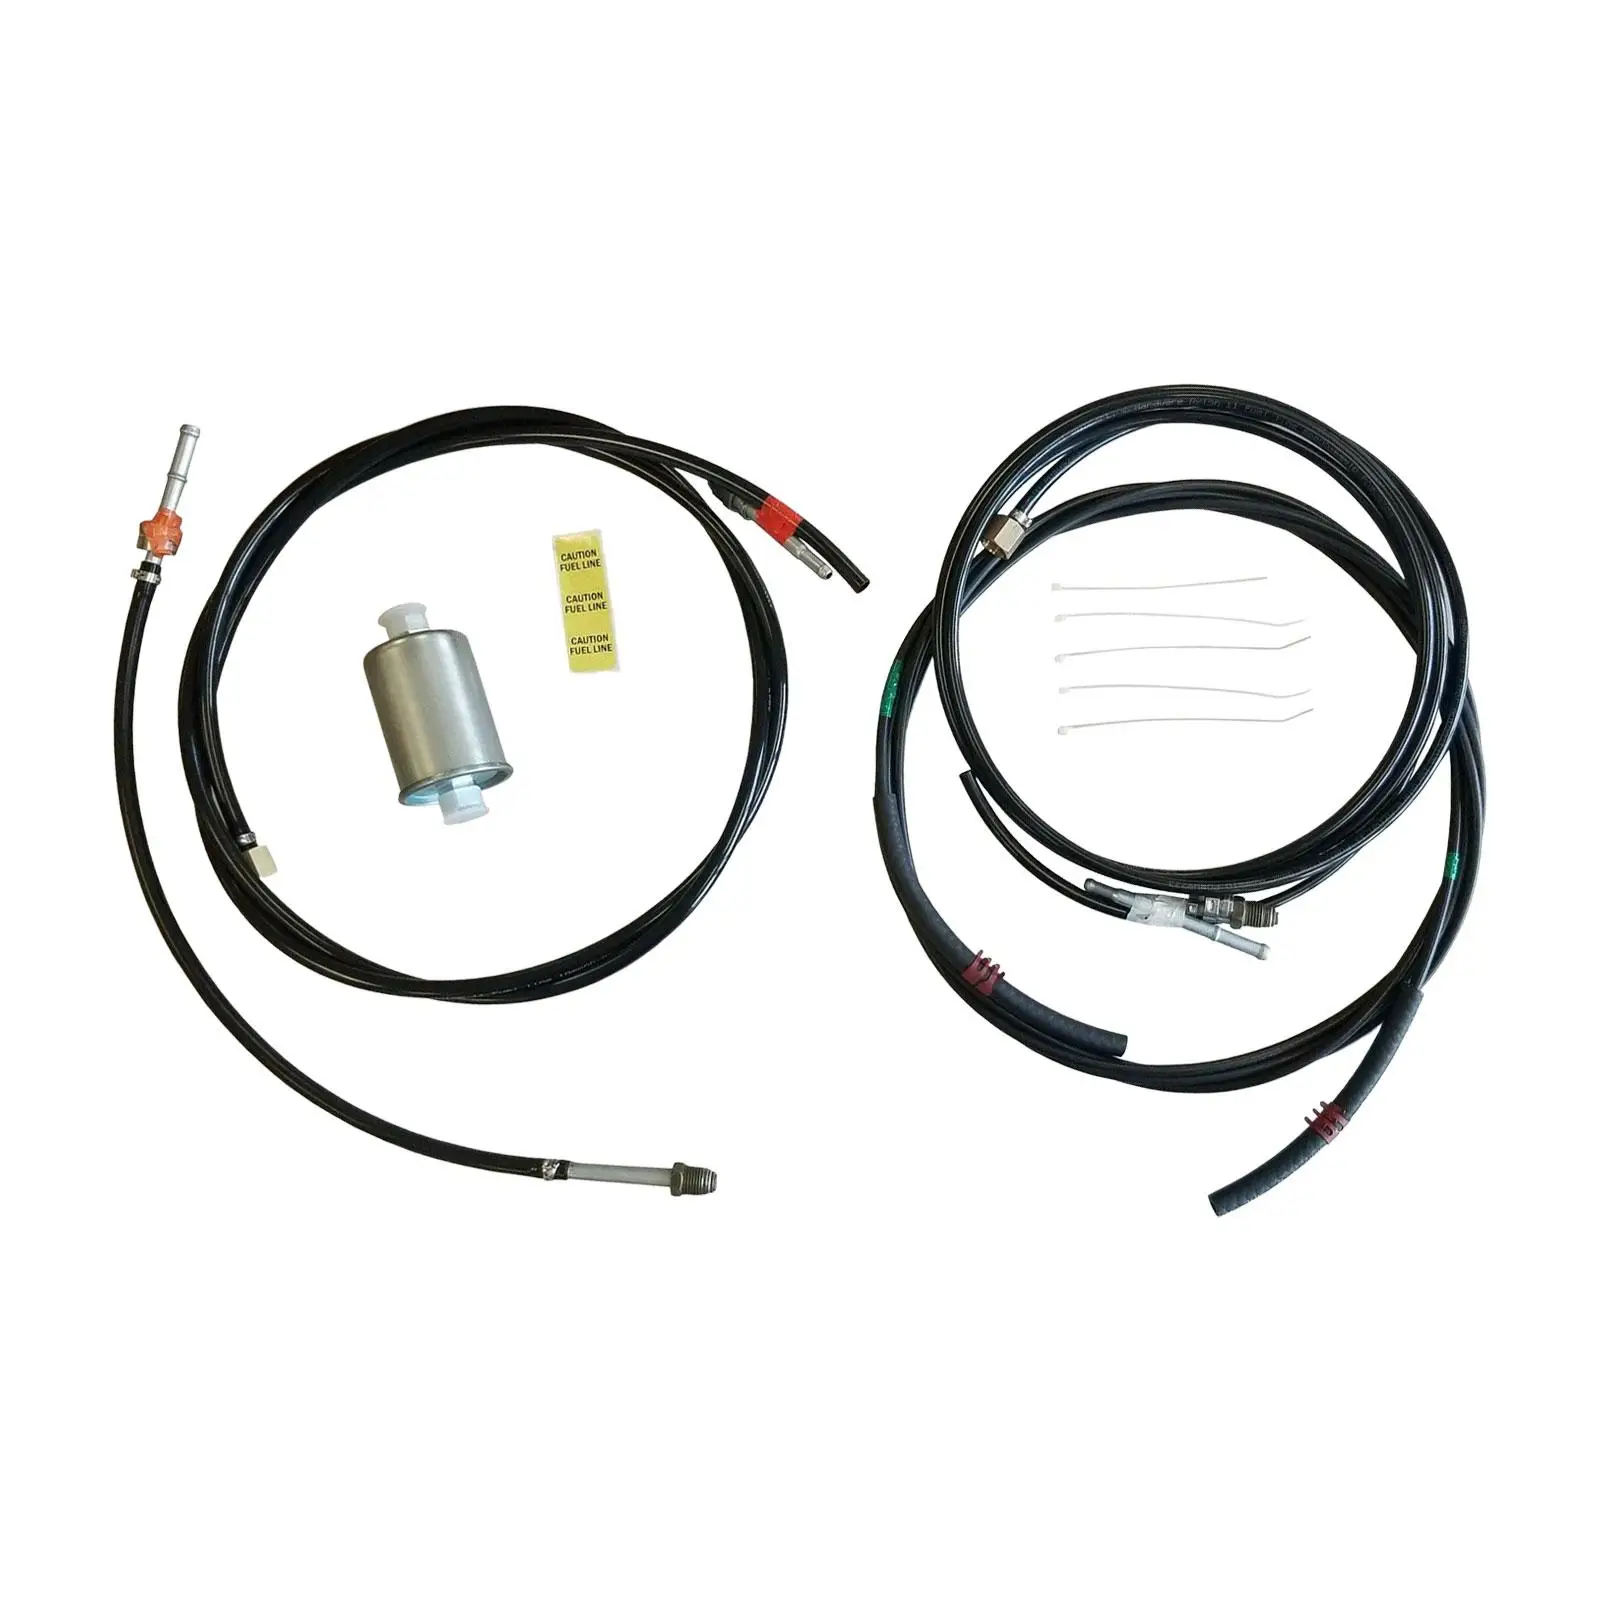 Fuel Lines Replacement Nfr0013 Replacement Tube Set Auto Accessories Easy to